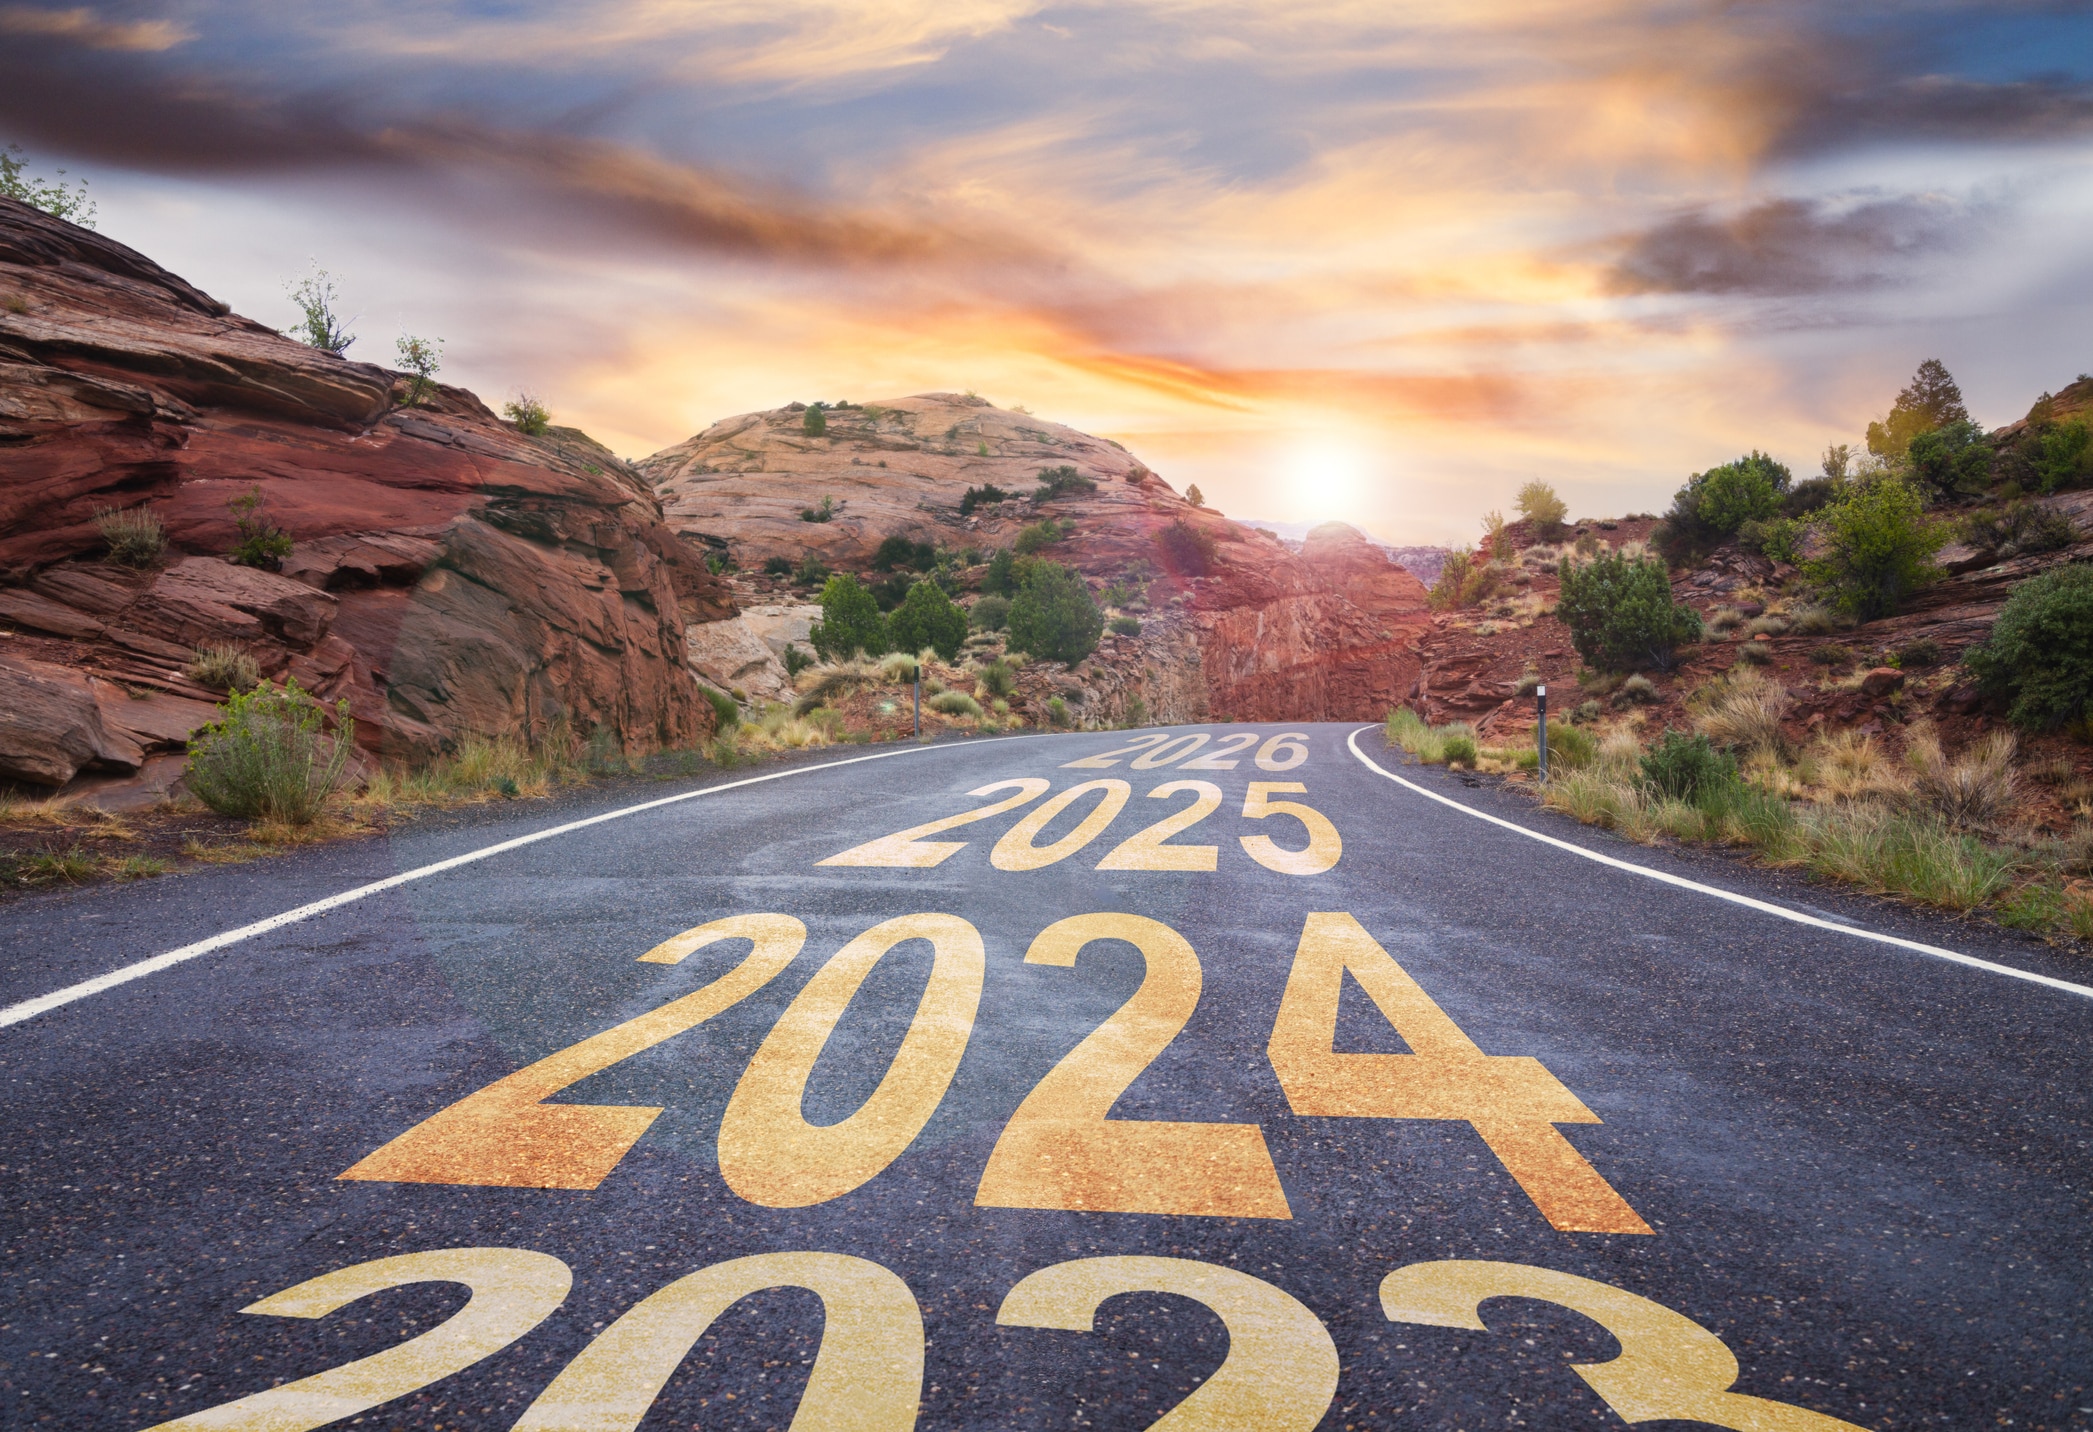 2023 changing to 2024 - road with sunrise and upcoming years ahead